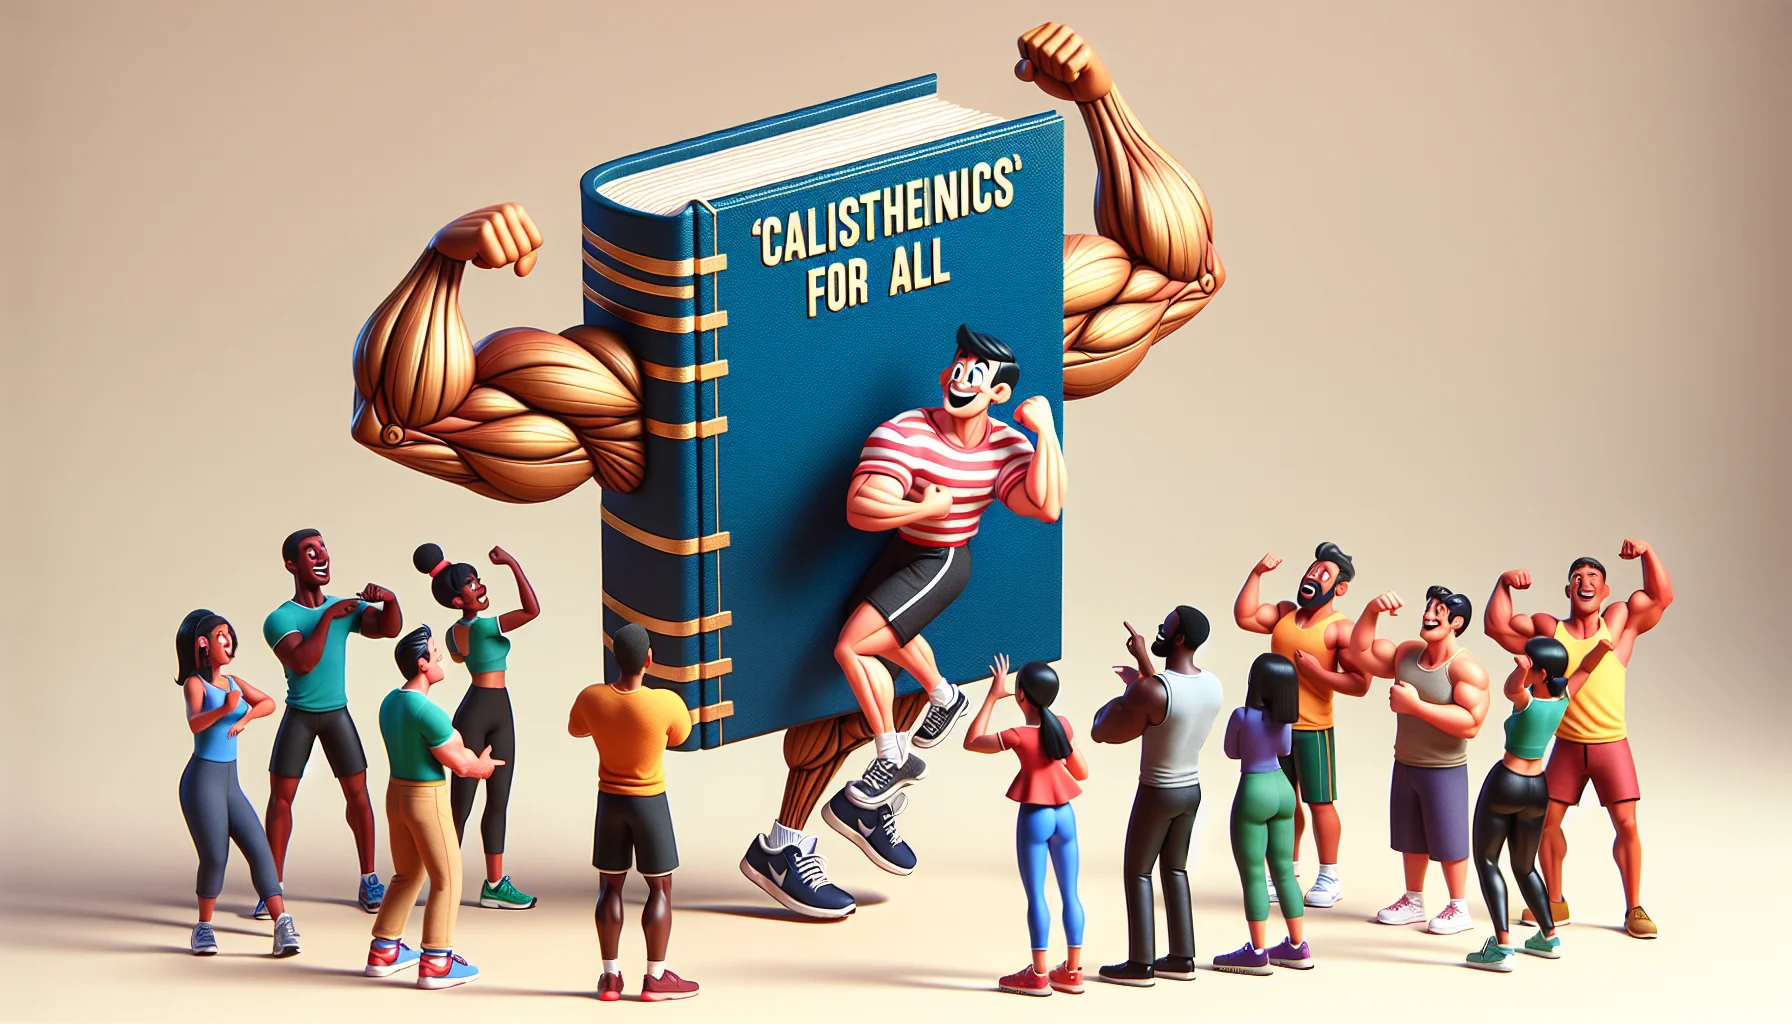 Create an image of a humorous scenario featuring a book on calisthenics that inspires people to exercise. In the scene, an animated book is standing upright on one corner, flexing its 'muscular' pages, imitating a human exercising. The title of the book 'Calisthenics for All' is clearly noticeable. Nearby, a group of human characters, consisting of a Hispanic male, a Caucasian female, a South Asian female, and a black male are watching in amusement and awe. Some are laughing and pointing, others are mimicking the book, pretending to flex their muscles while looking eager to start exercising.